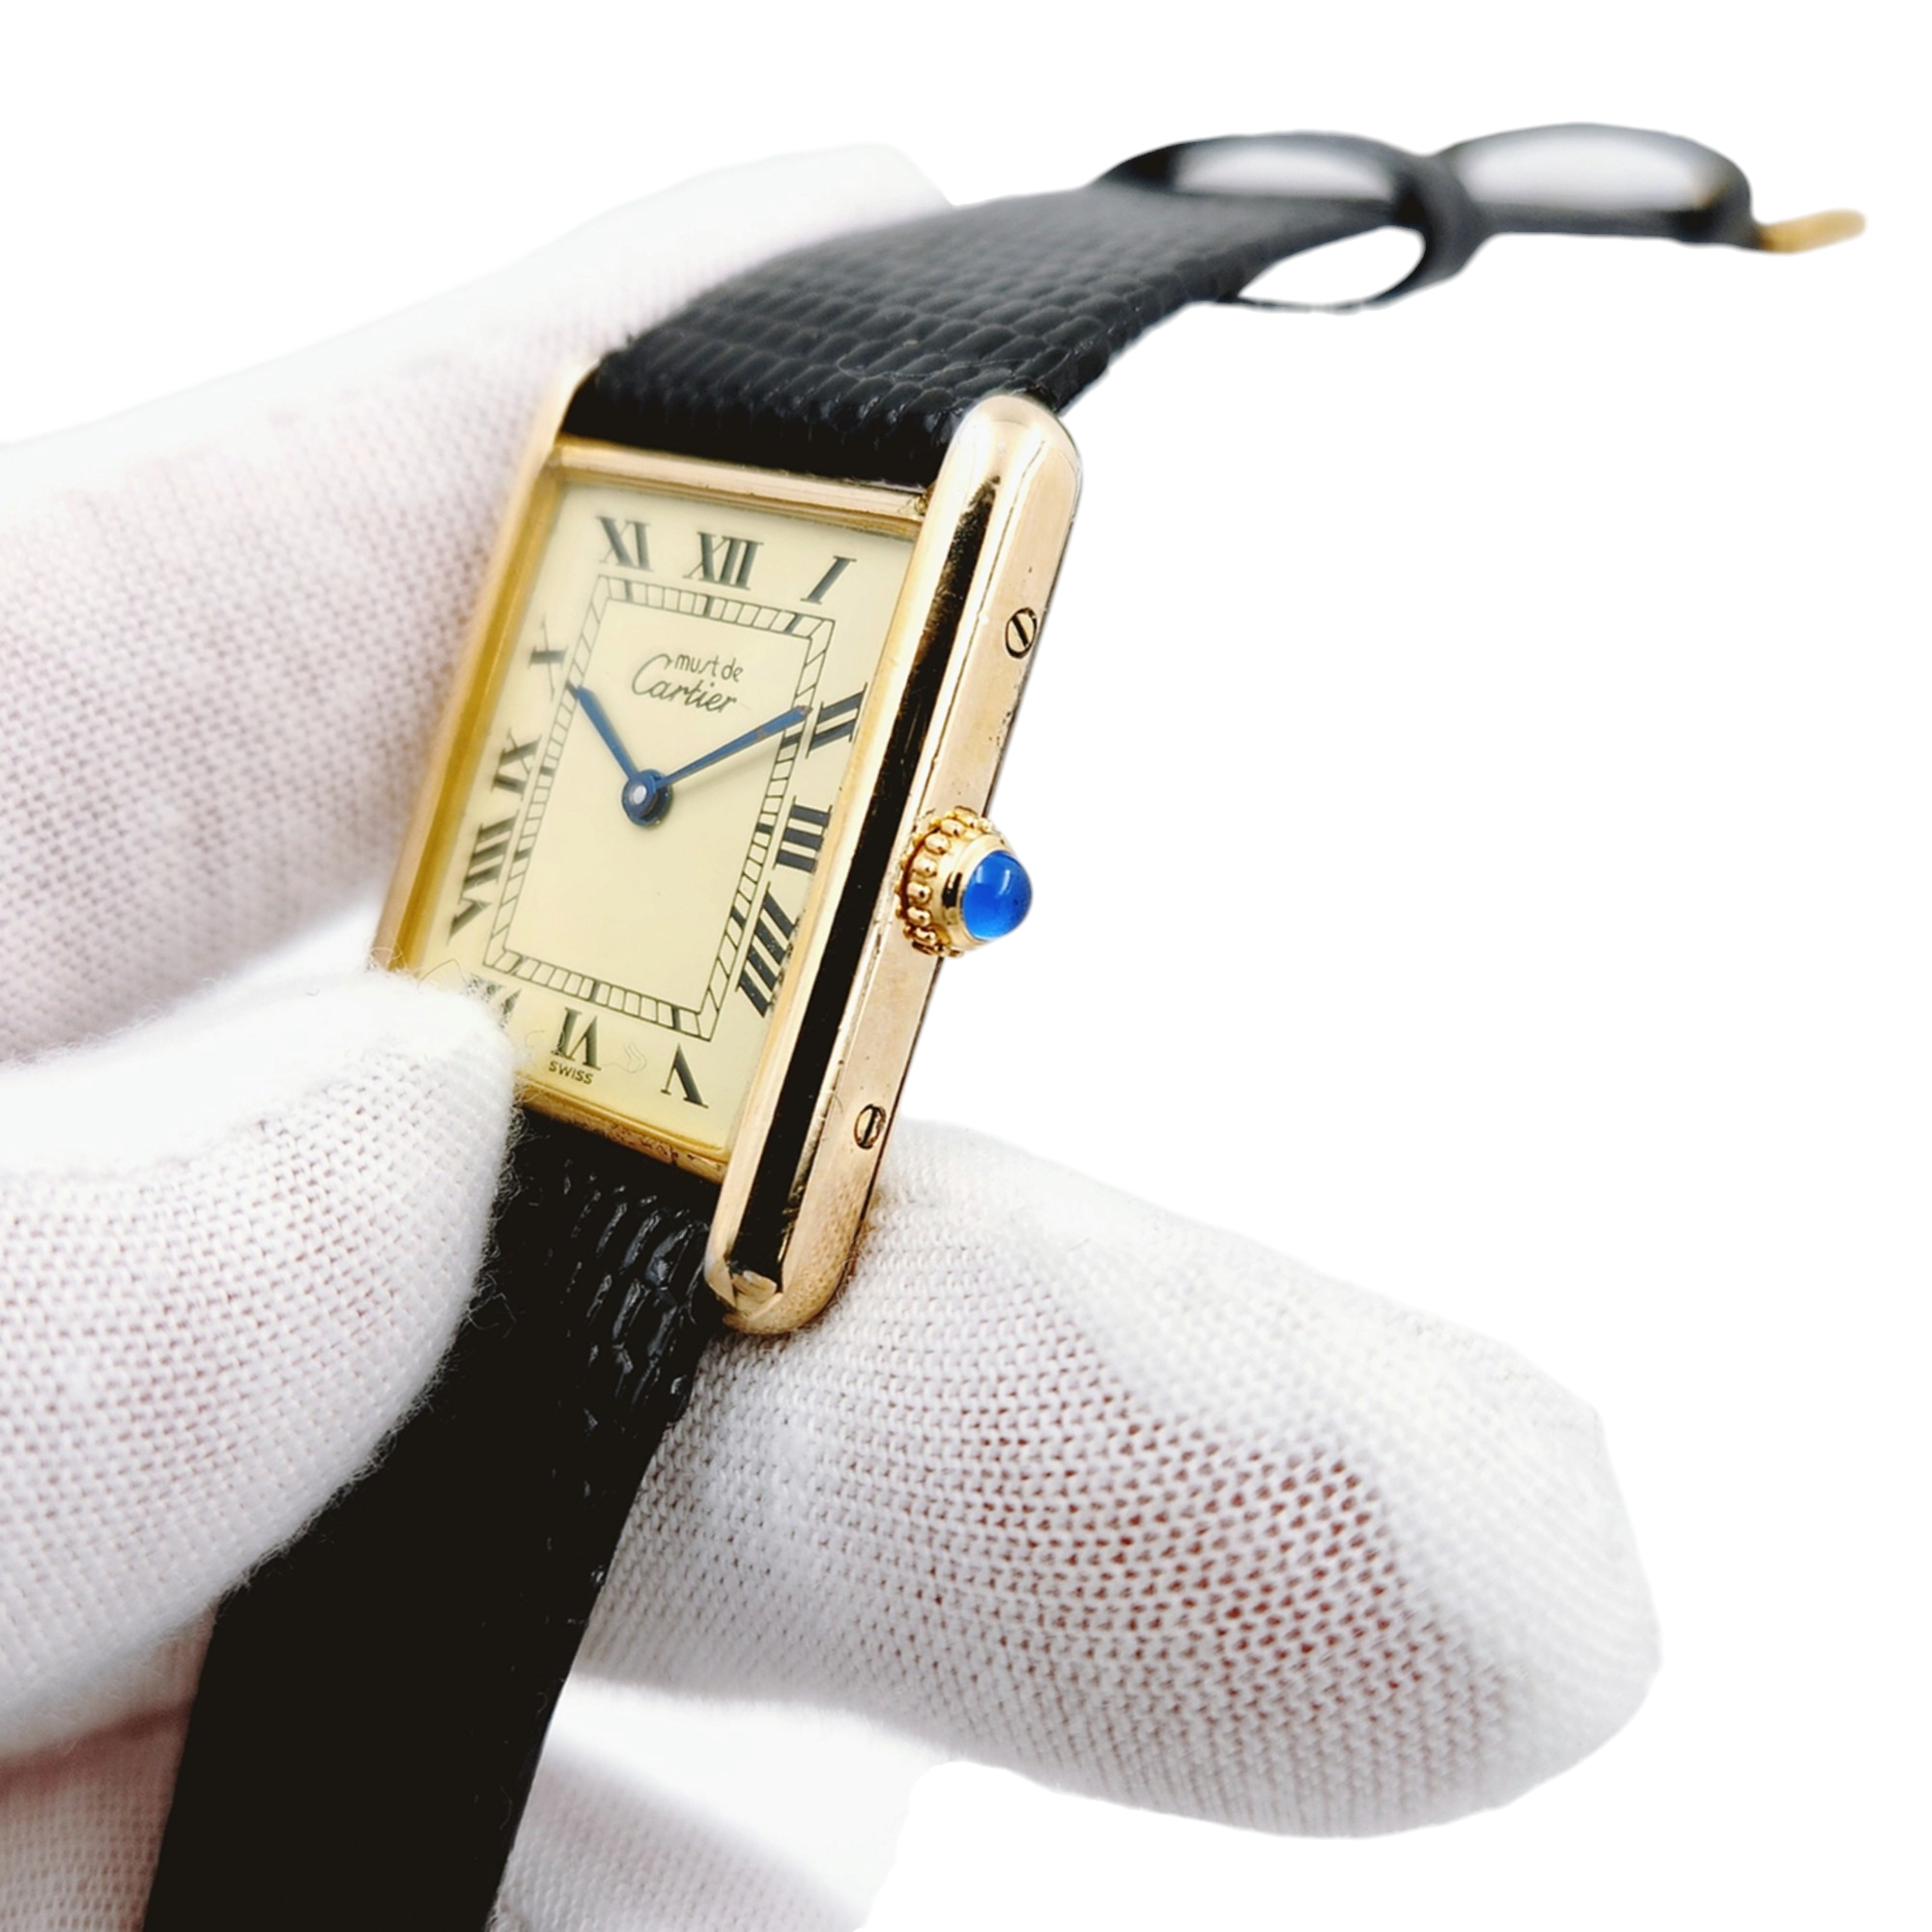 Ladies Cartier Tank "must de Cartier" Vintage Vermeil Yellow Gold Watch with Cream Roman Numeral Dial and Black Leather Band. (Pre-Owned)